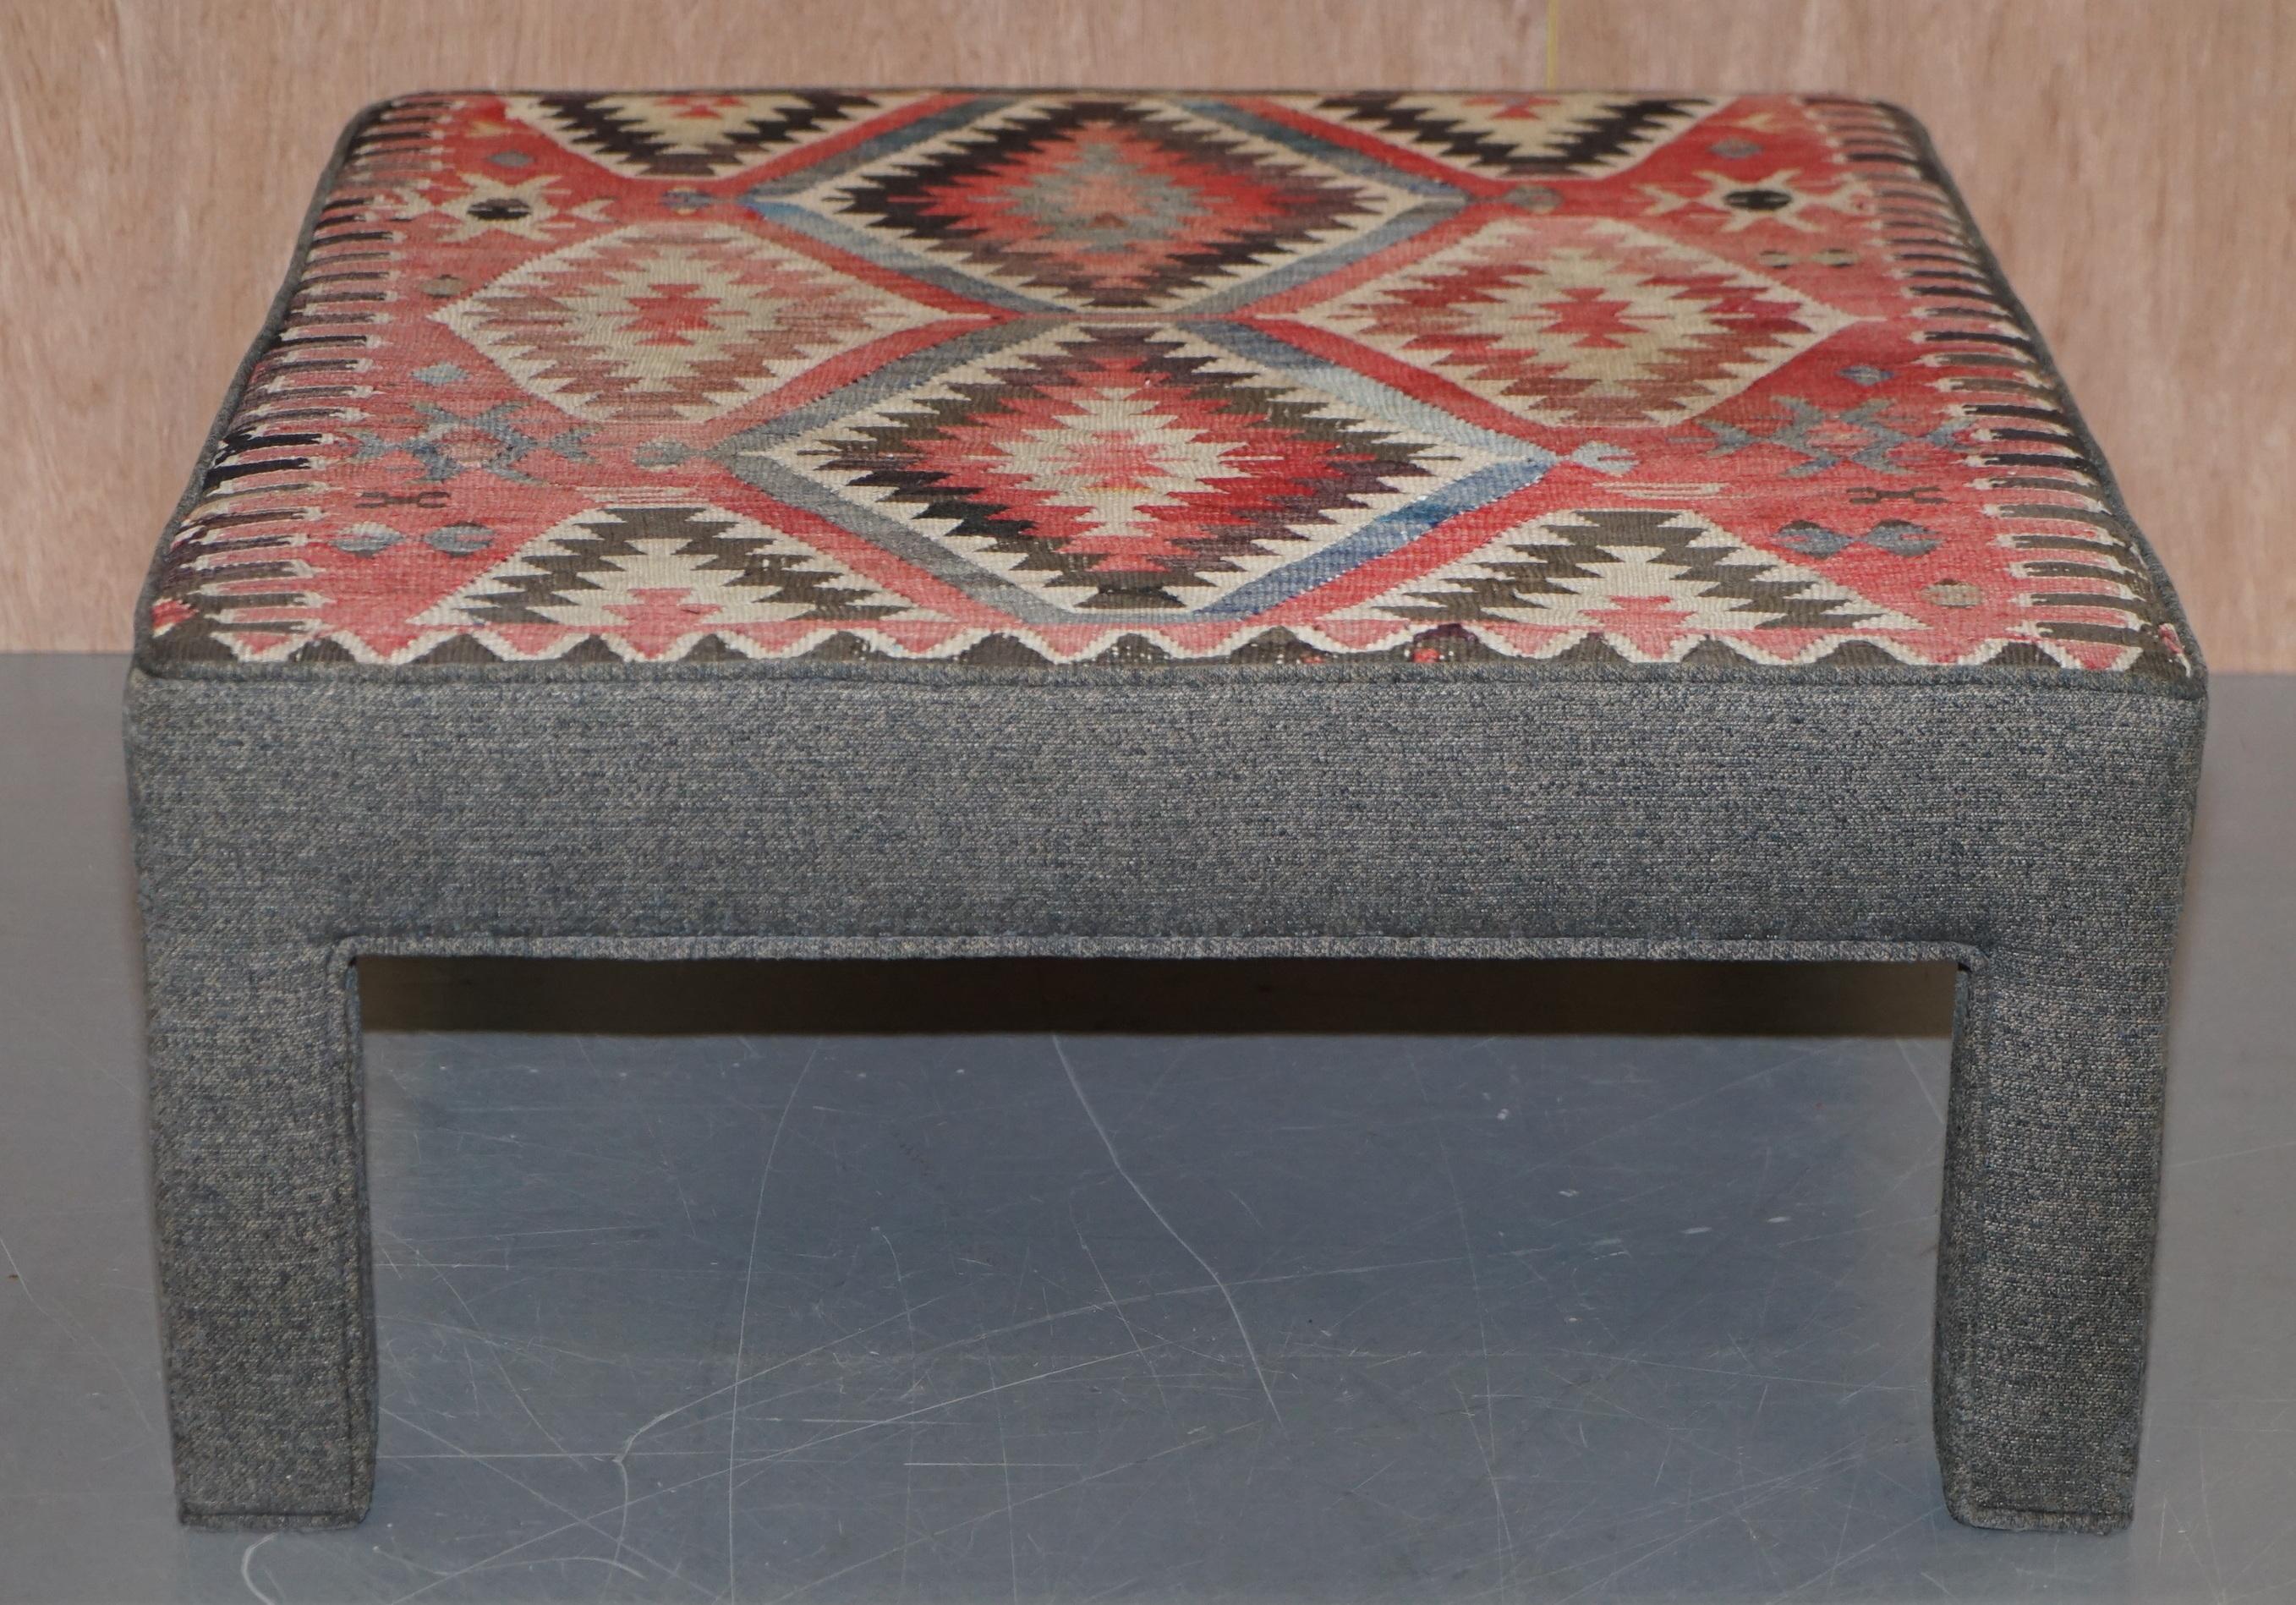 Vintage Kilim Upholstered Bench Ottoman Footstool Can Be Used as Coffee Table 2